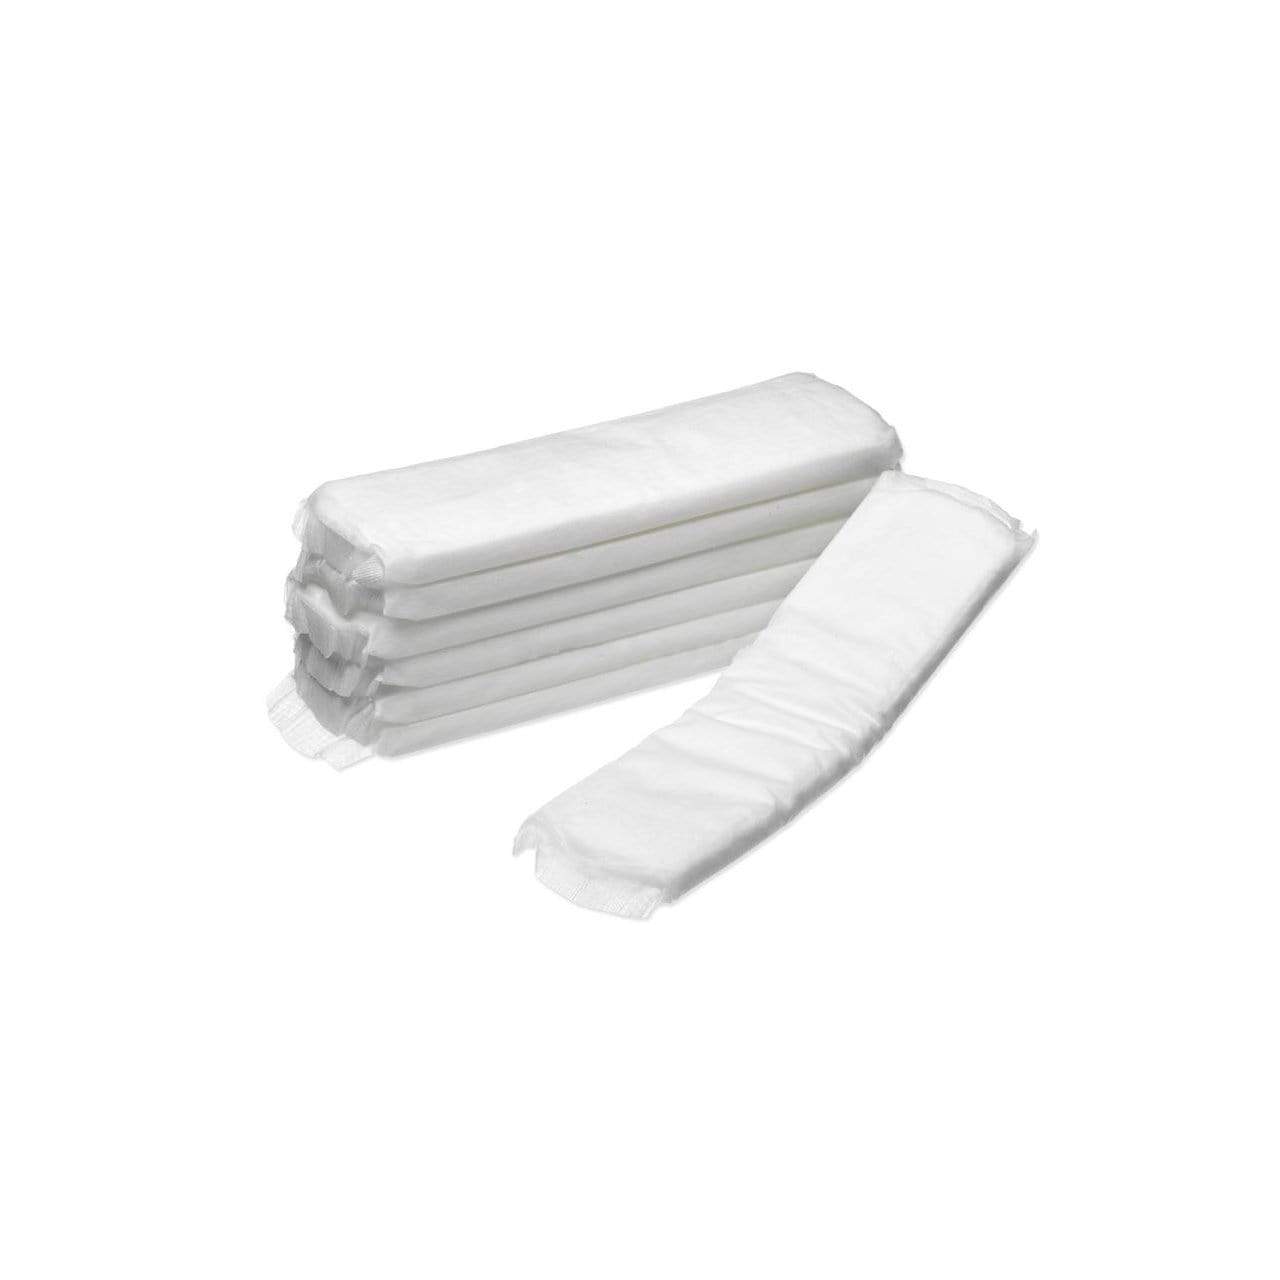 BSN Medical Propax Maternity Pads